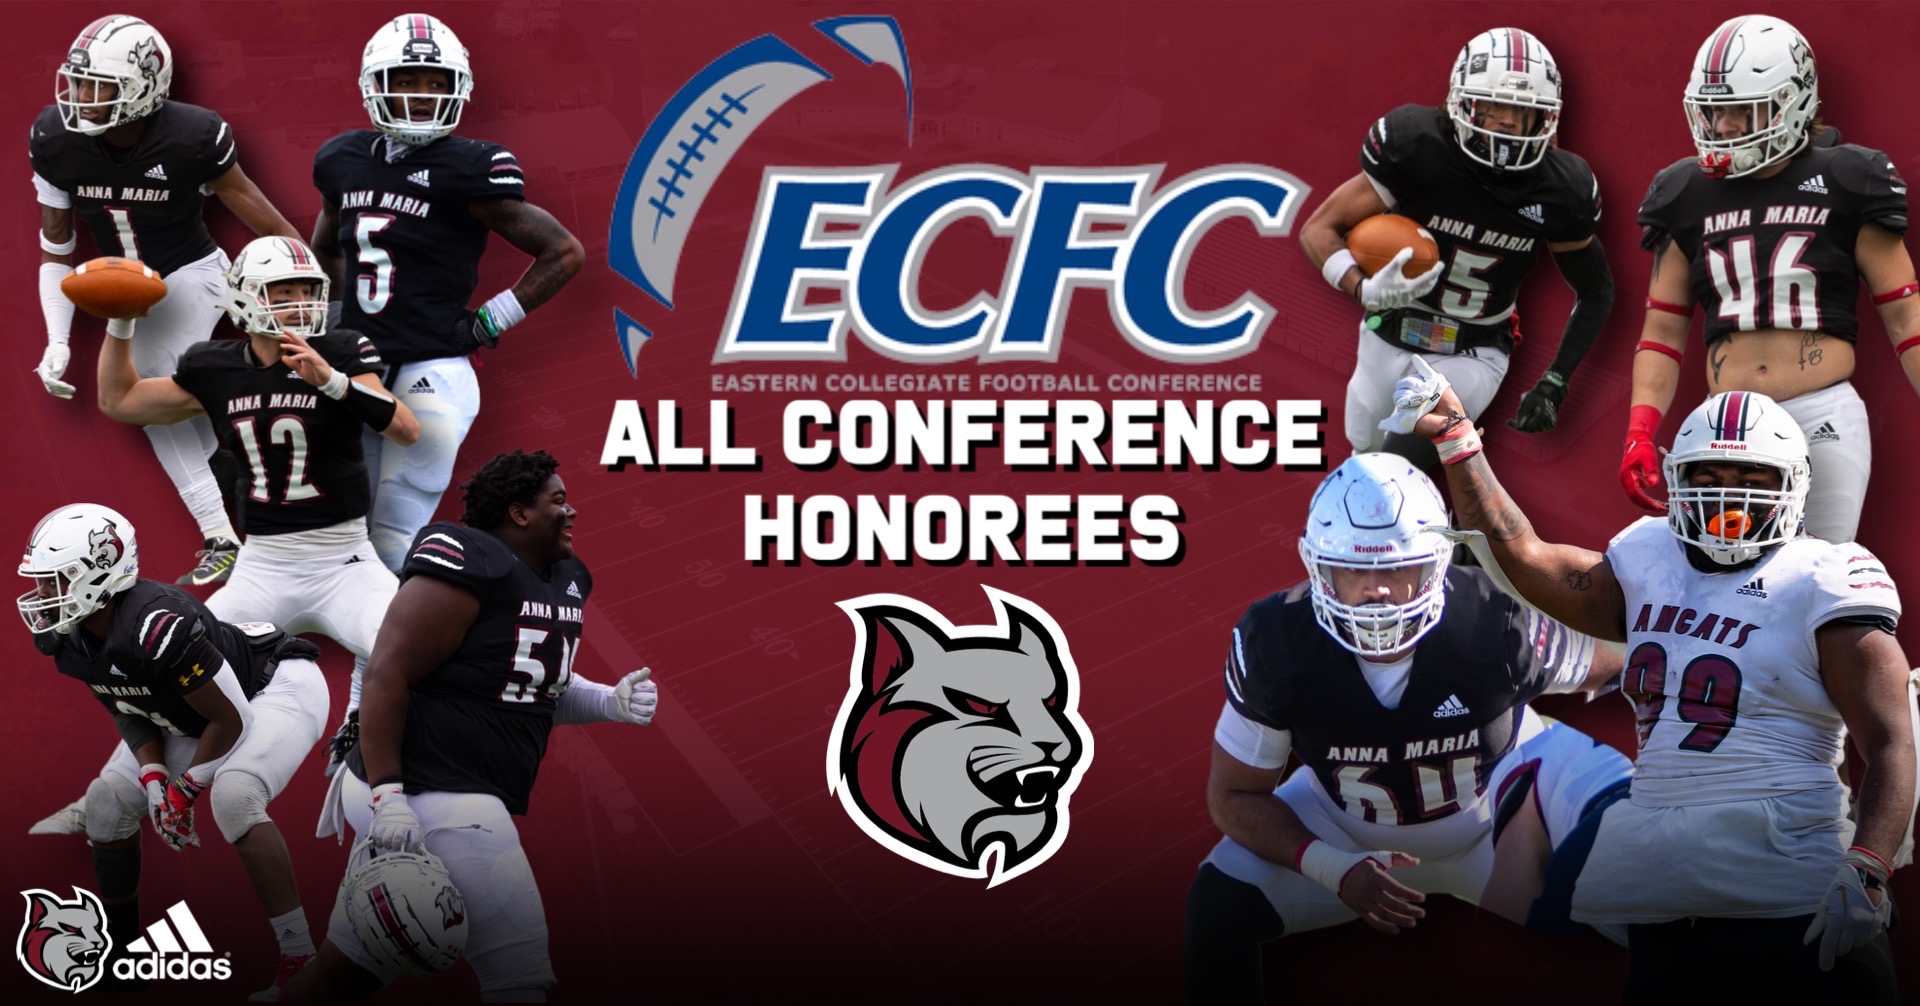 ECFC Announces All-Conference Honorees